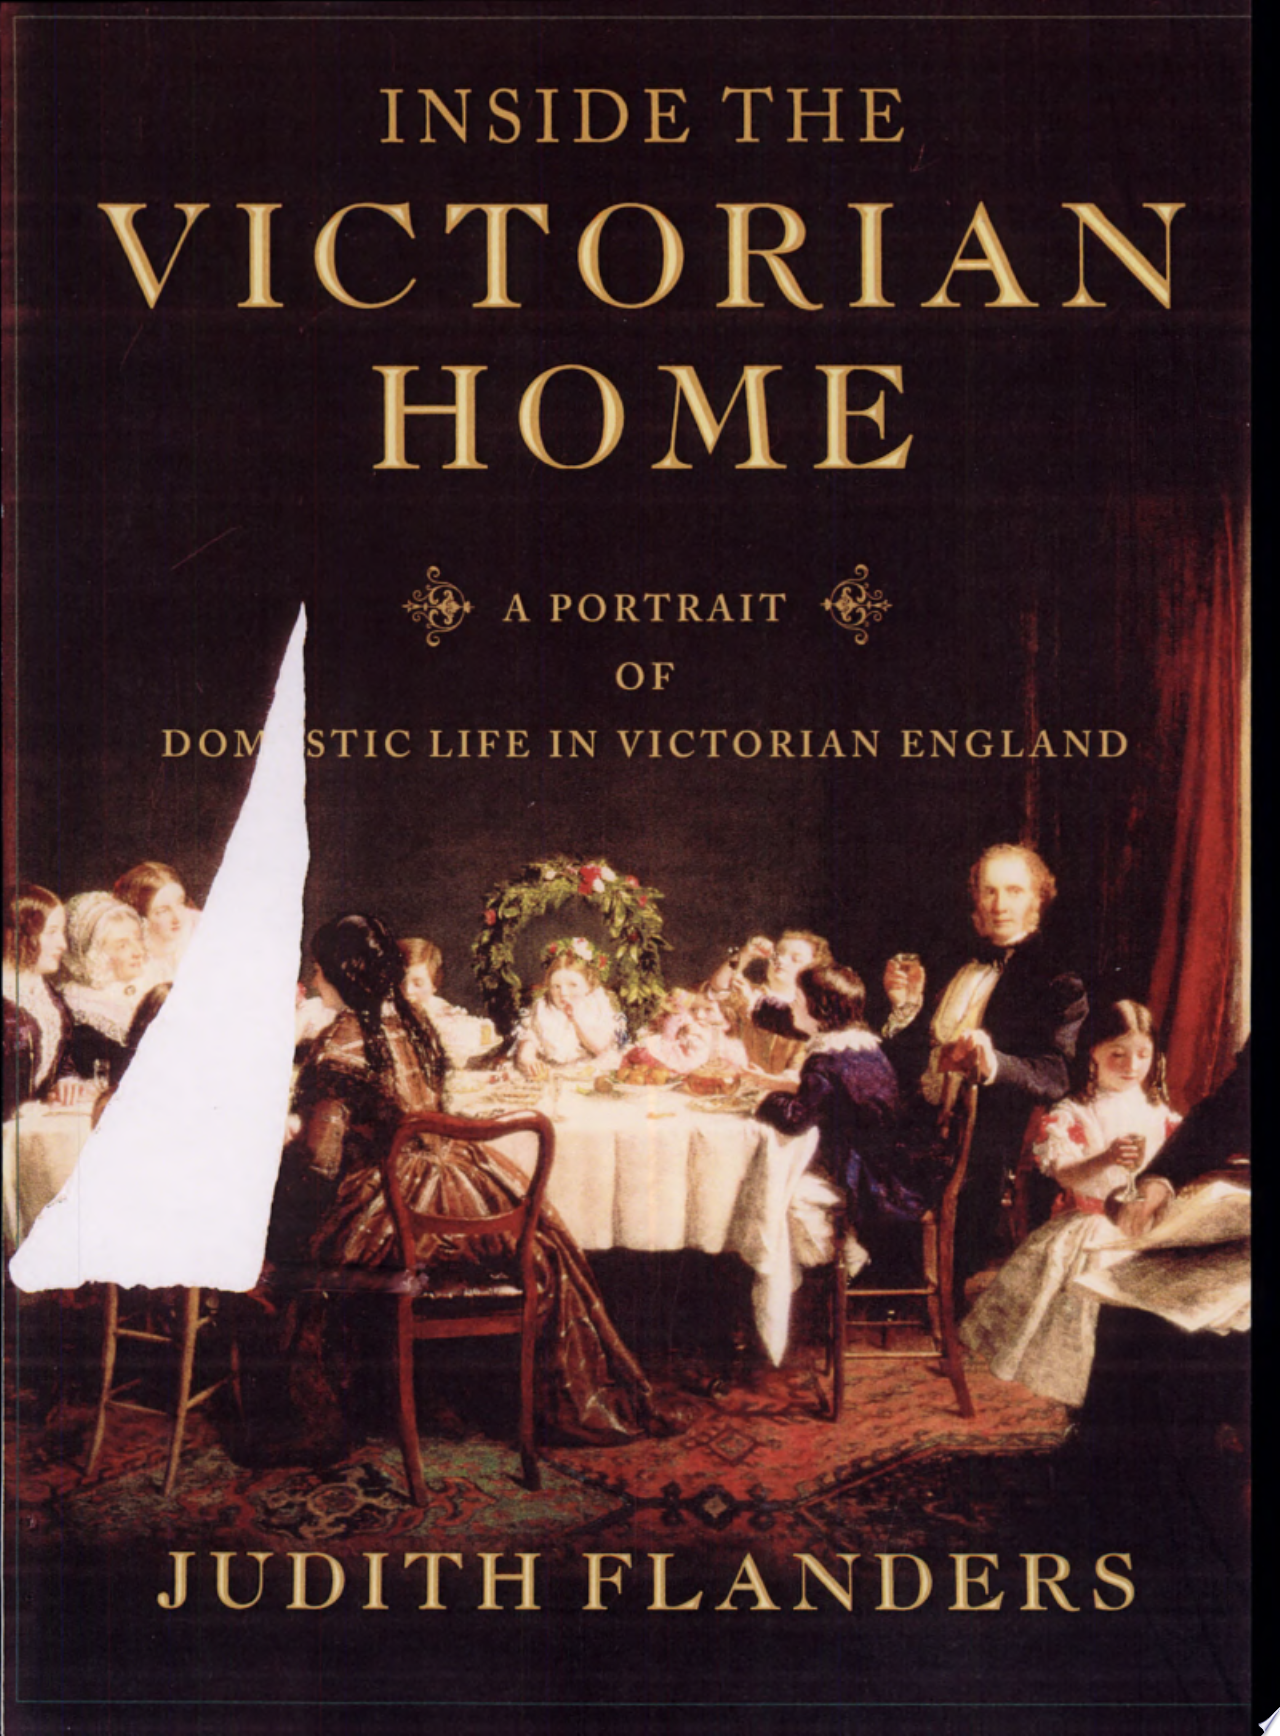 Image for "Inside the Victorian Home"